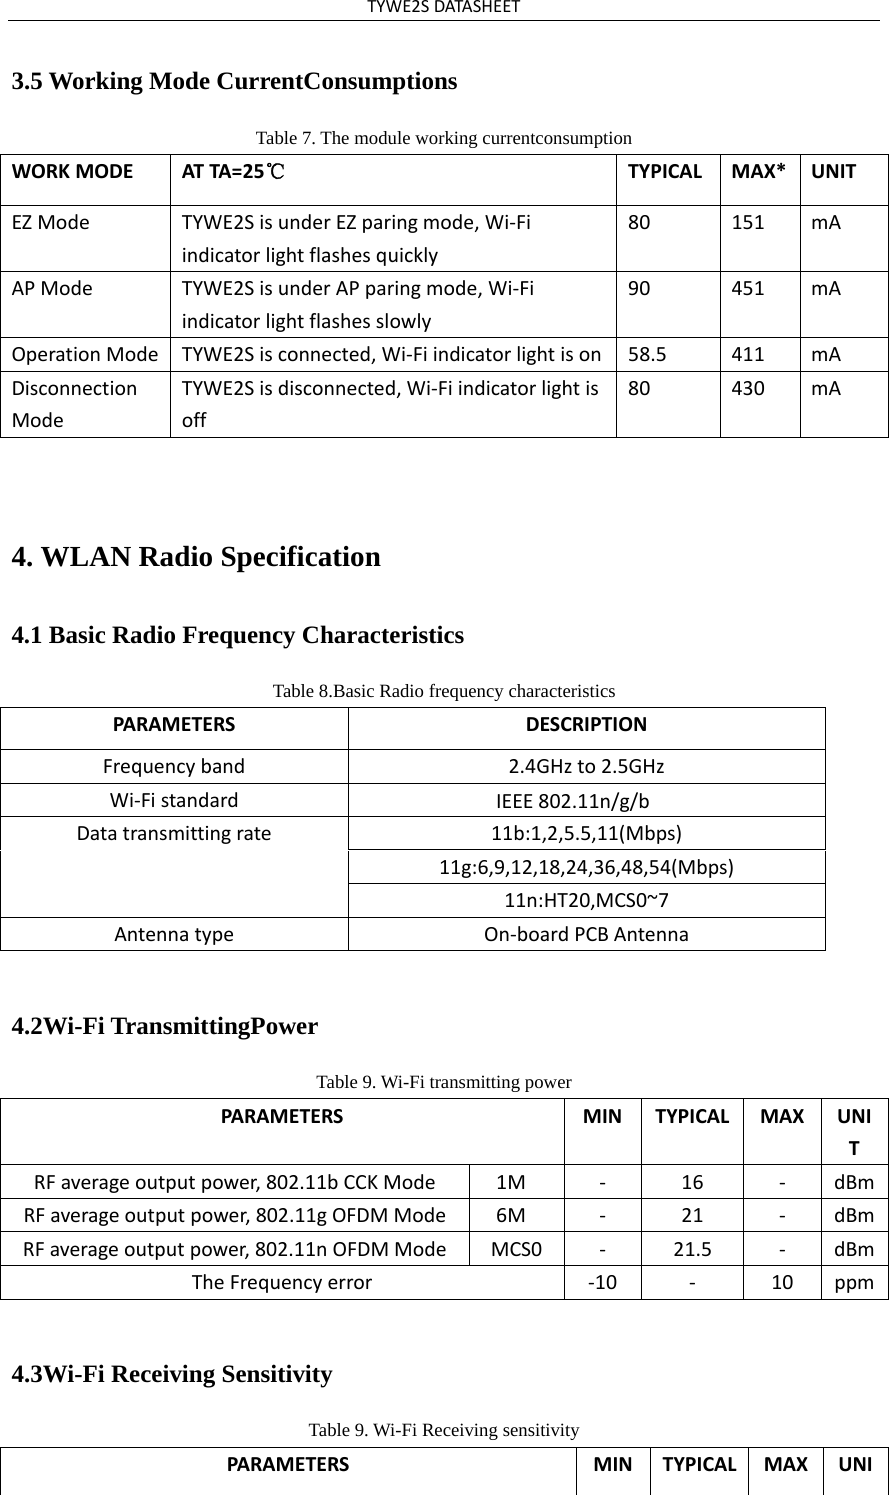 TYWE2SDATASHEET3.5 Working Mode CurrentConsumptions Table 7. The module working currentconsumption WORKMODEATTA=25℃TYPICALMAX*UNITEZModeTYWE2SisunderEZparingmode,Wi‐Fiindicatorlightflashesquickly80151mAAPModeTYWE2SisunderAPparingmode,Wi‐Fiindicatorlightflashesslowly90451mAOperationModeTYWE2Sisconnected,Wi‐Fiindicatorlightison 58.5411mADisconnectionModeTYWE2Sisdisconnected,Wi‐Fiindicatorlightisoff80430mA4. WLAN Radio Specification4.1 Basic Radio Frequency Characteristics Table 8.Basic Radio frequency characteristics PARAMETERSDESCRIPTIONFrequencyband2.4GHzto2.5GHzWi‐FistandardIEEE802.11n/g/bDatatransmittingrate11b:1,2,5.5,11(Mbps)11g:6,9,12,18,24,36,48,54(Mbps)11n:HT20,MCS0~7AntennatypeOn‐boardPCBAntenna4.2Wi-Fi TransmittingPower Table 9. Wi-Fi transmitting power PARAMETERSMIN TYPICALMAXUNITRFaverageoutputpower,802.11bCCKMode1M‐ 16‐dBmRFaverageoutputpower,802.11gOFDMMode6M‐ 21‐dBmRFaverageoutputpower,802.11nOFDMModeMCS0‐ 21.5‐dBmTheFrequencyerror ‐10‐ 10ppm4.3Wi-Fi Receiving Sensitivity Table 9. Wi-Fi Receiving sensitivity PARAMETERSMIN TYPICALMAXUNI